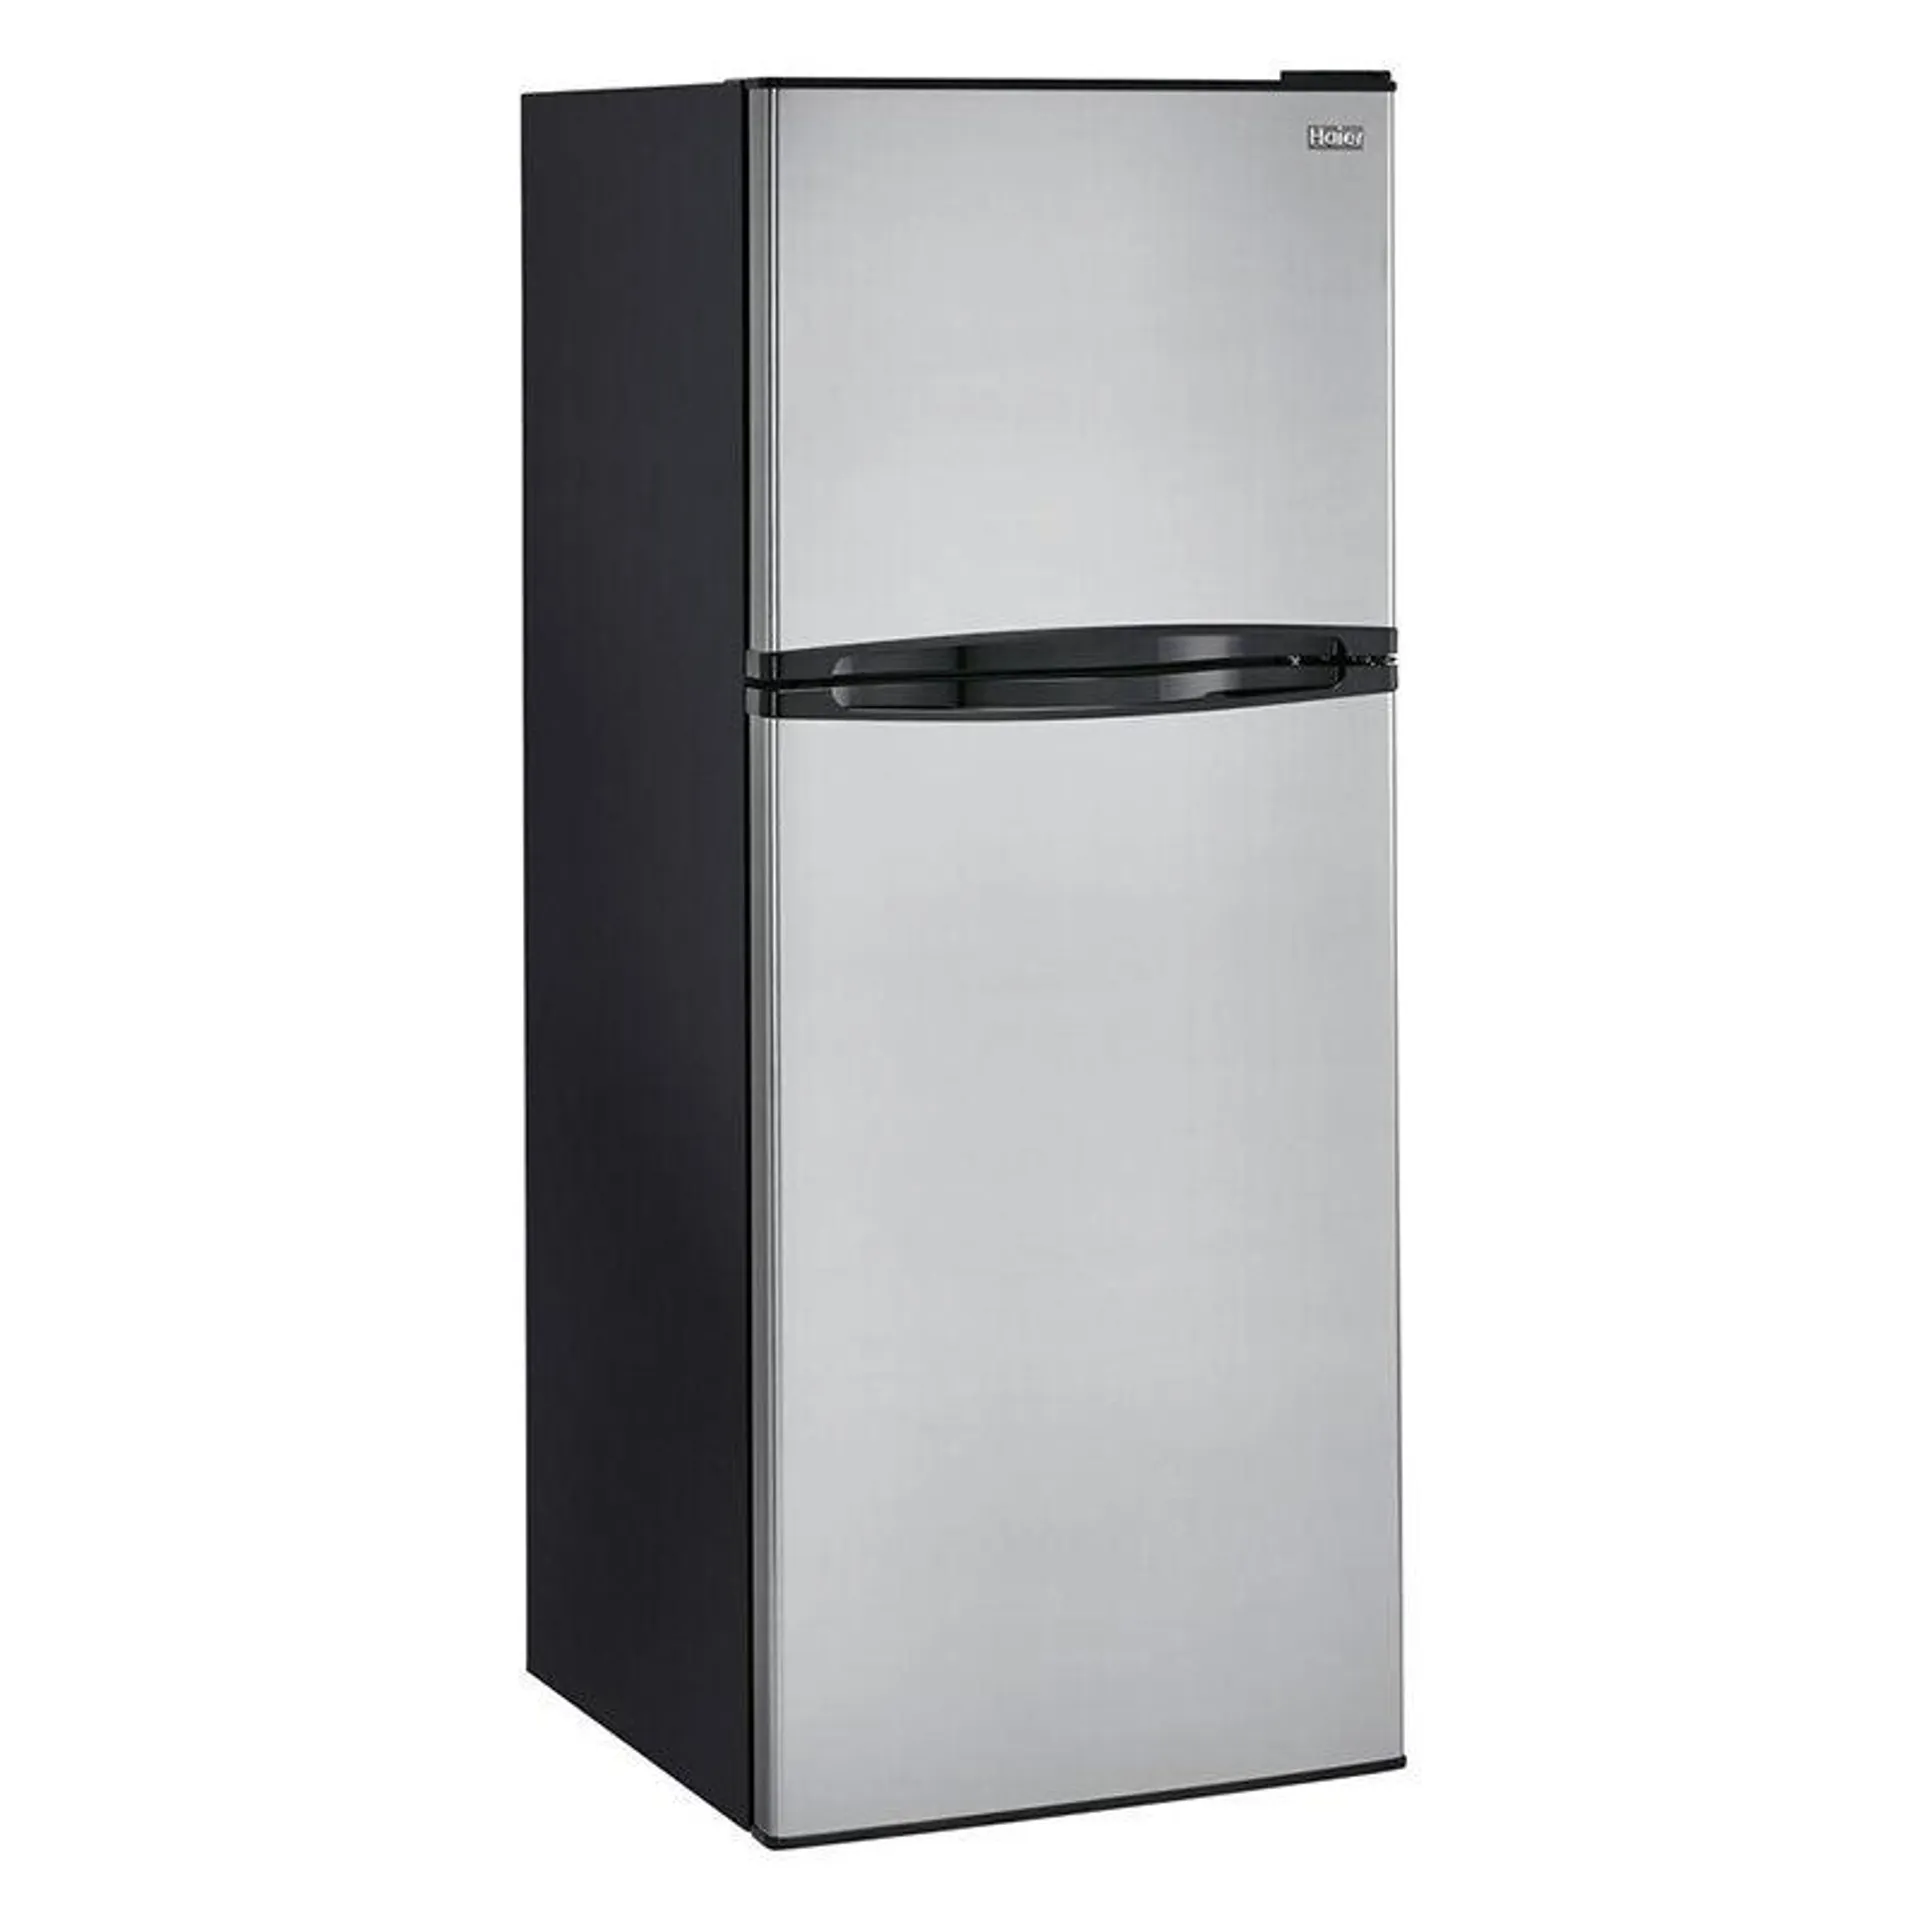 Haier 24 in. 9.8 cu. ft. Counter Depth Top Freezer Refrigerator - Stainless Steel